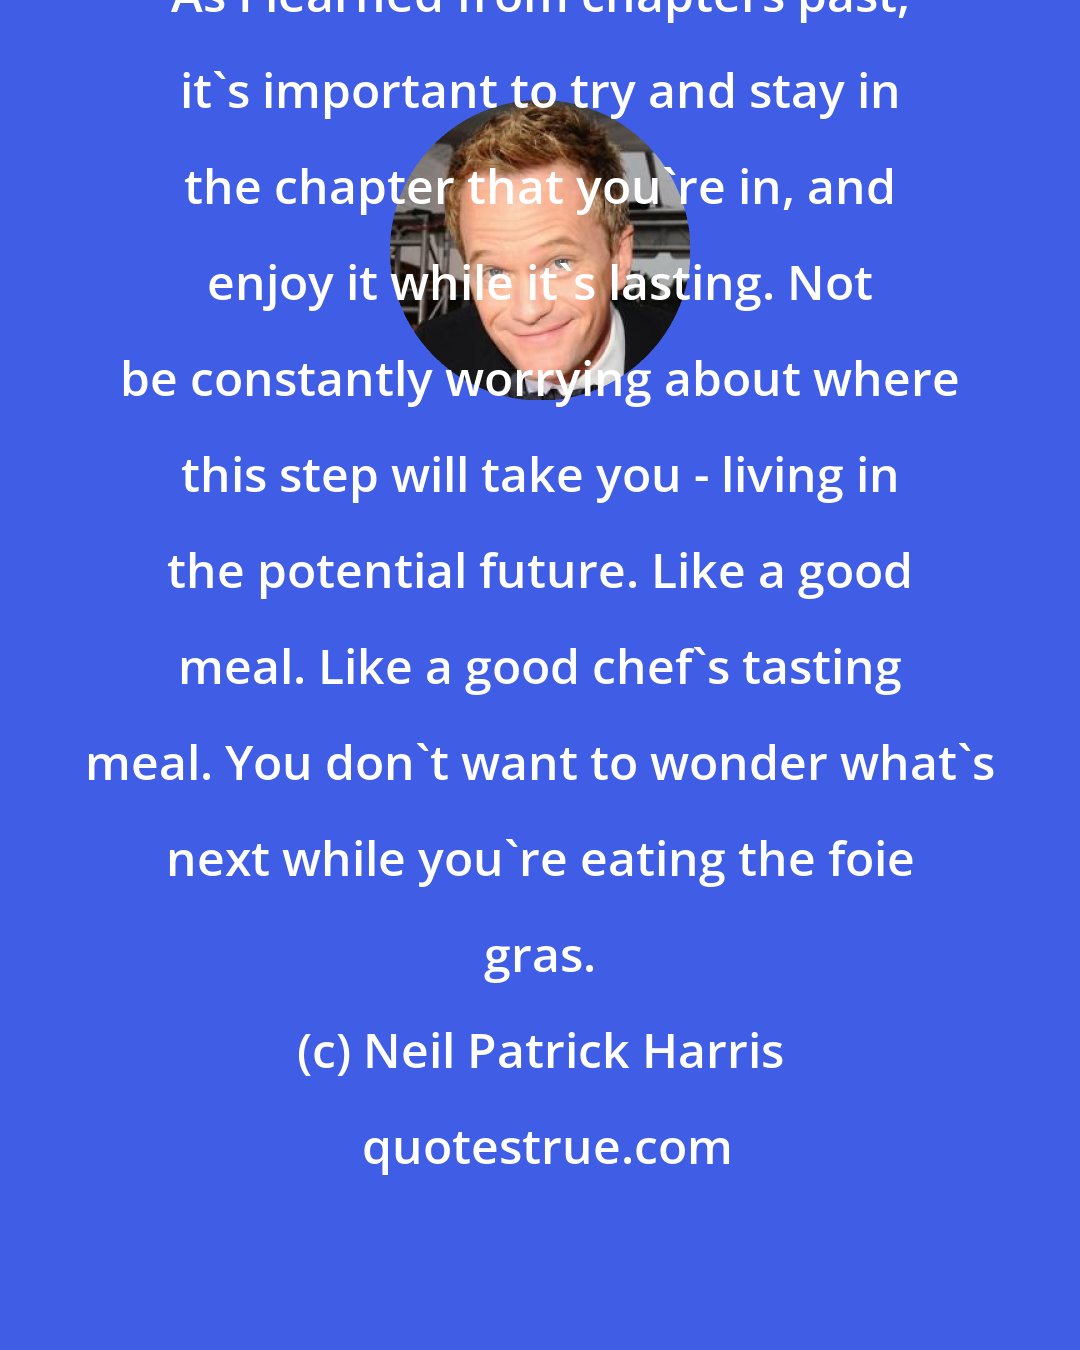 Neil Patrick Harris: As I learned from chapters past, it's important to try and stay in the chapter that you're in, and enjoy it while it's lasting. Not be constantly worrying about where this step will take you - living in the potential future. Like a good meal. Like a good chef's tasting meal. You don't want to wonder what's next while you're eating the foie gras.